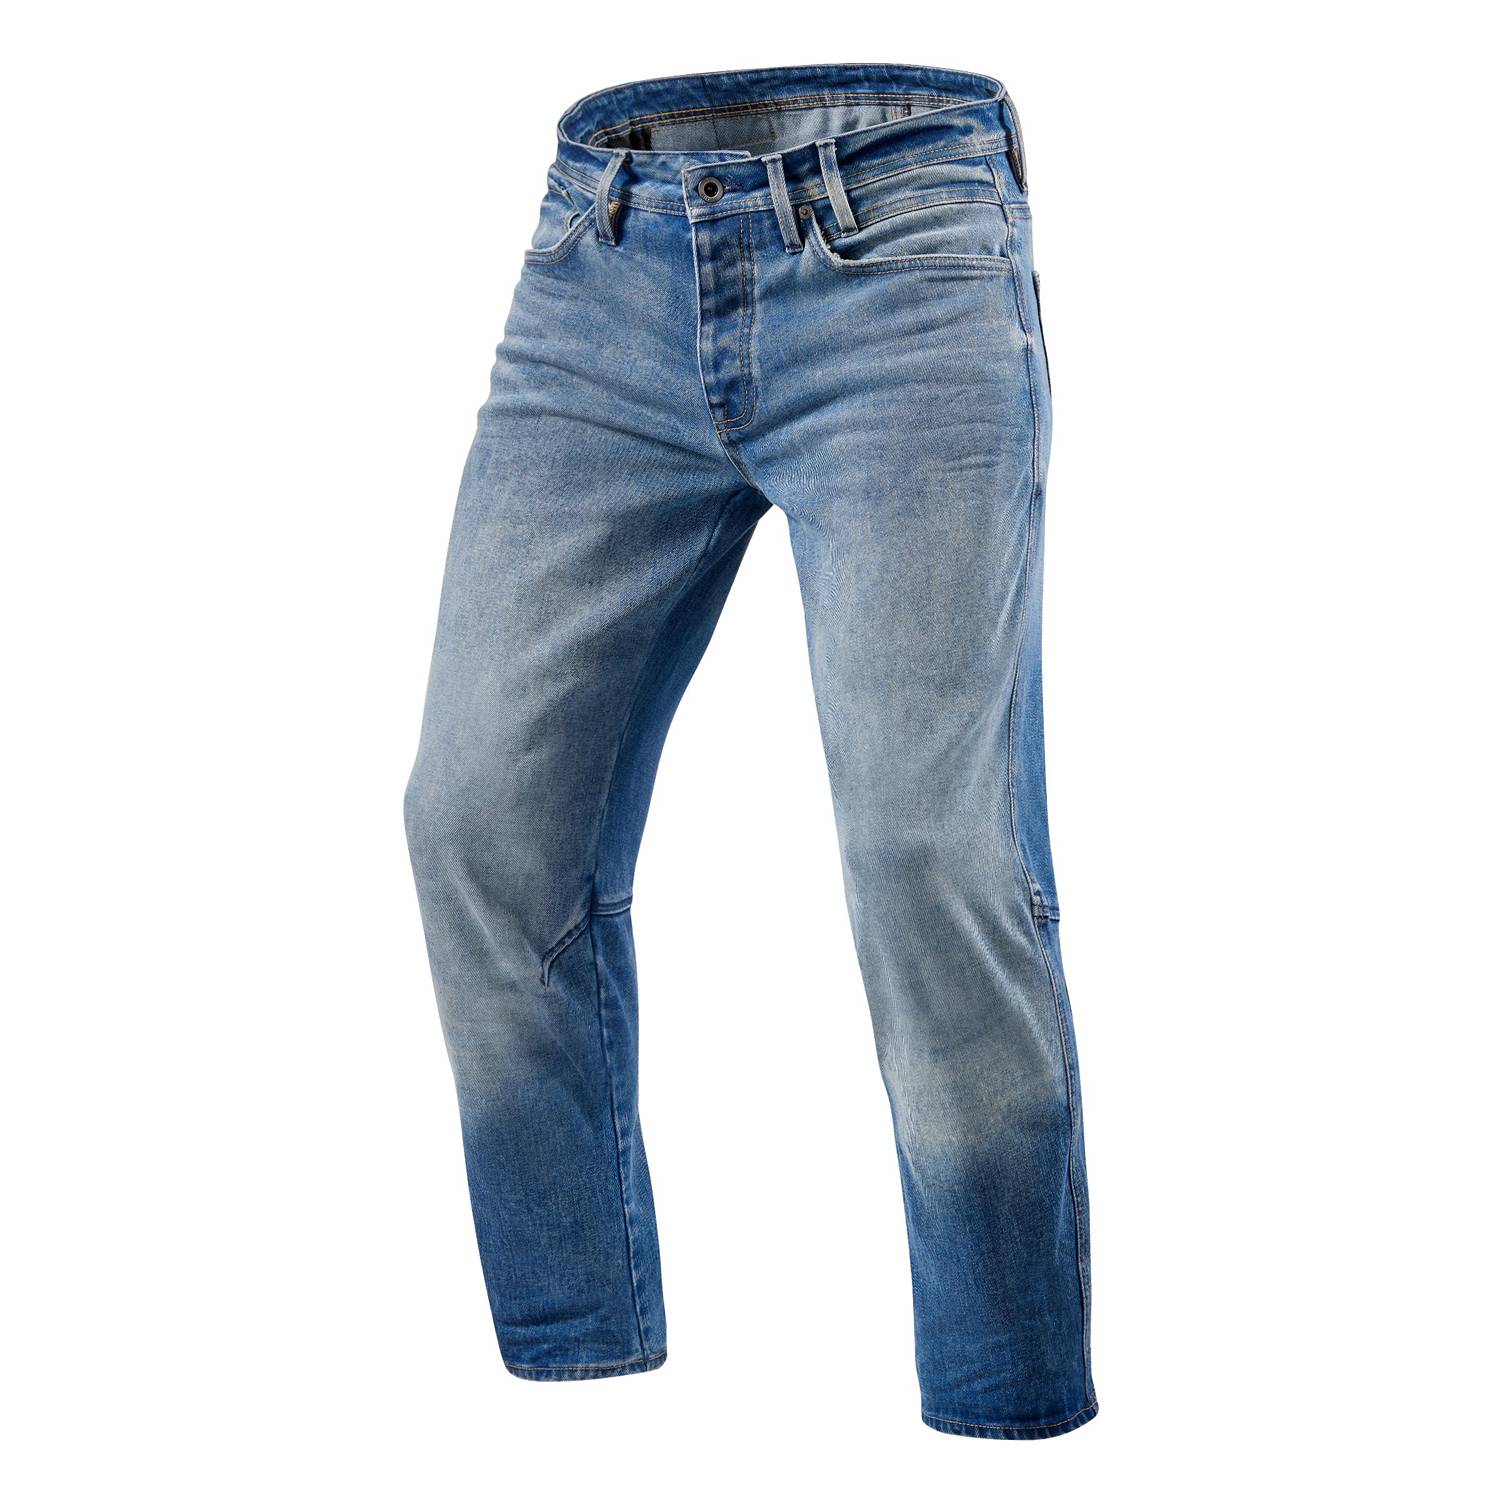 Image of REV'IT! Salt TF Mid Blue Used Motorcycle Jeans Size L32/W28 ID 8700001339117